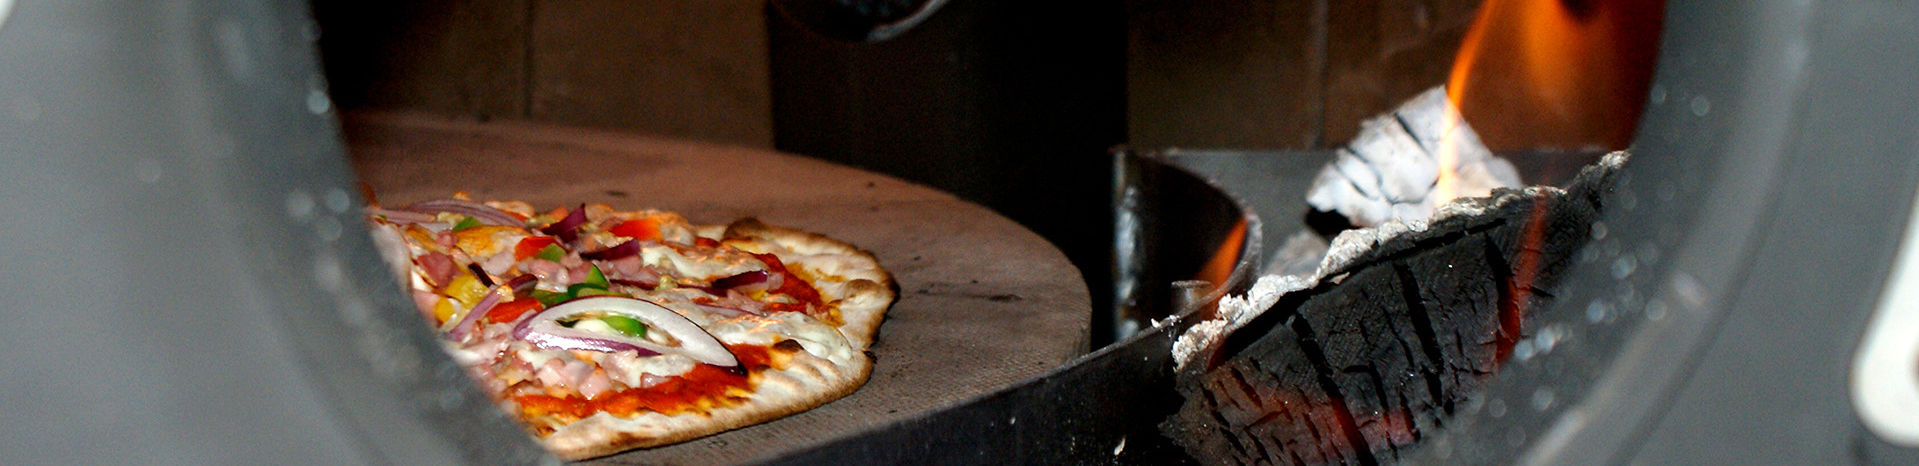 woodness-pizzapizza-in-de-oven